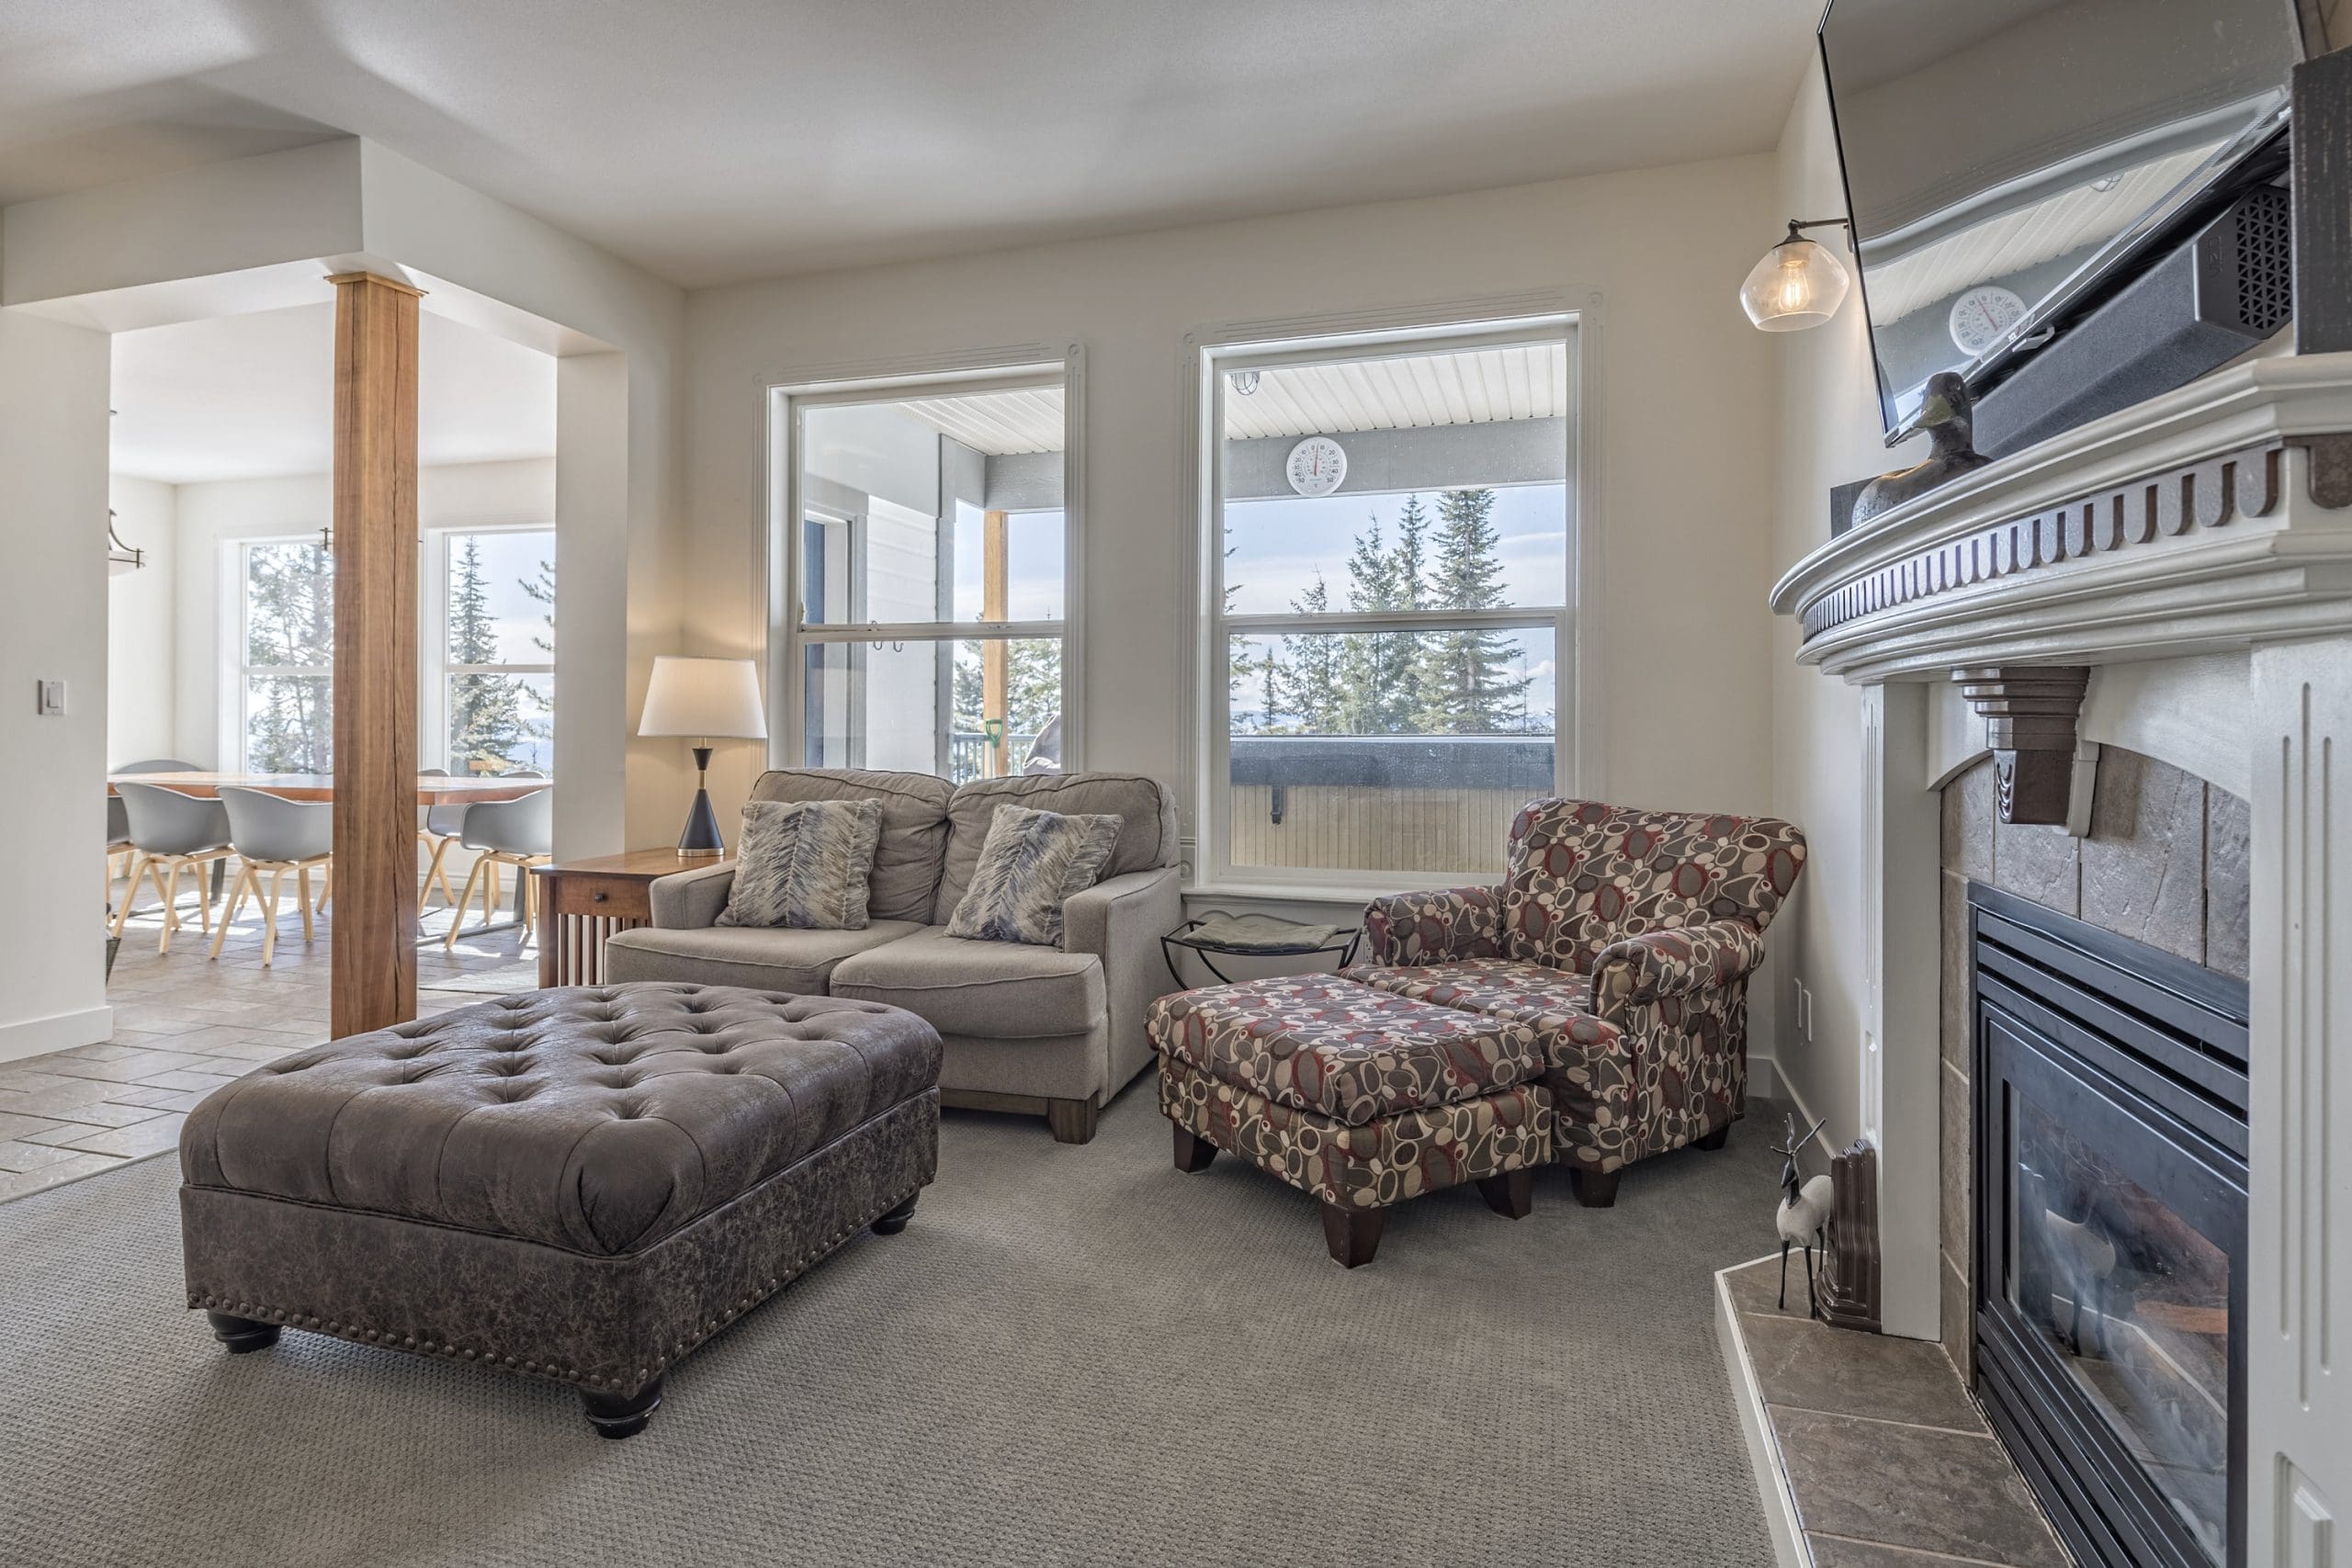 Eldorado living room with incredible views of the Monashee Mountains, gas fireplace, TV, dining area and table, fully stocked kitchen. Private Hot tub, shared laundry and ski room with waxing bench.